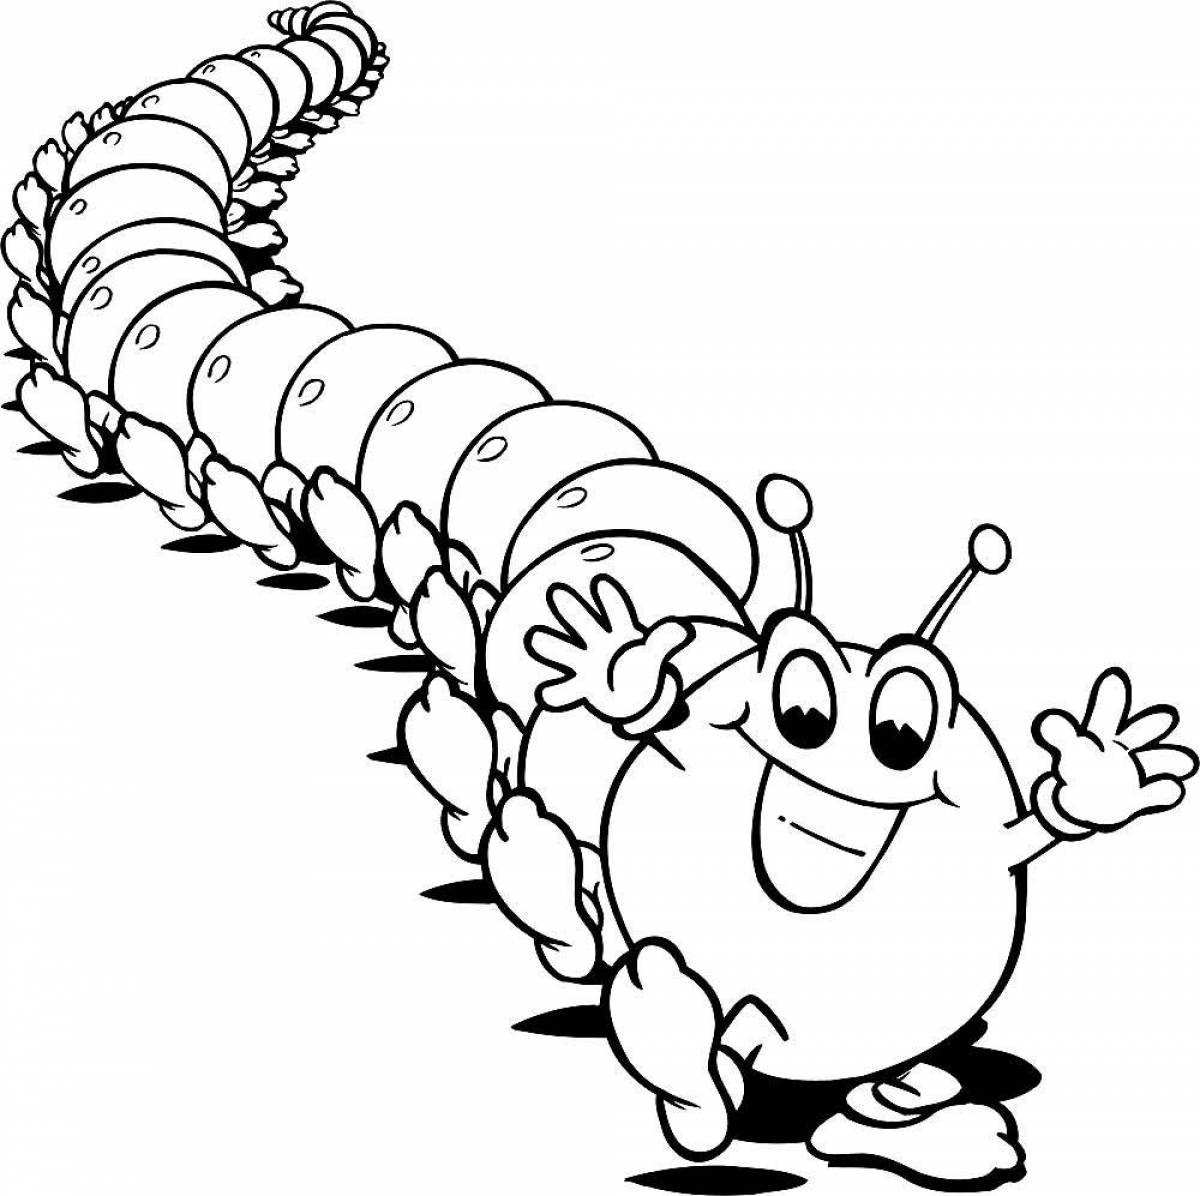 Vibrant pug caterpillar coloring page